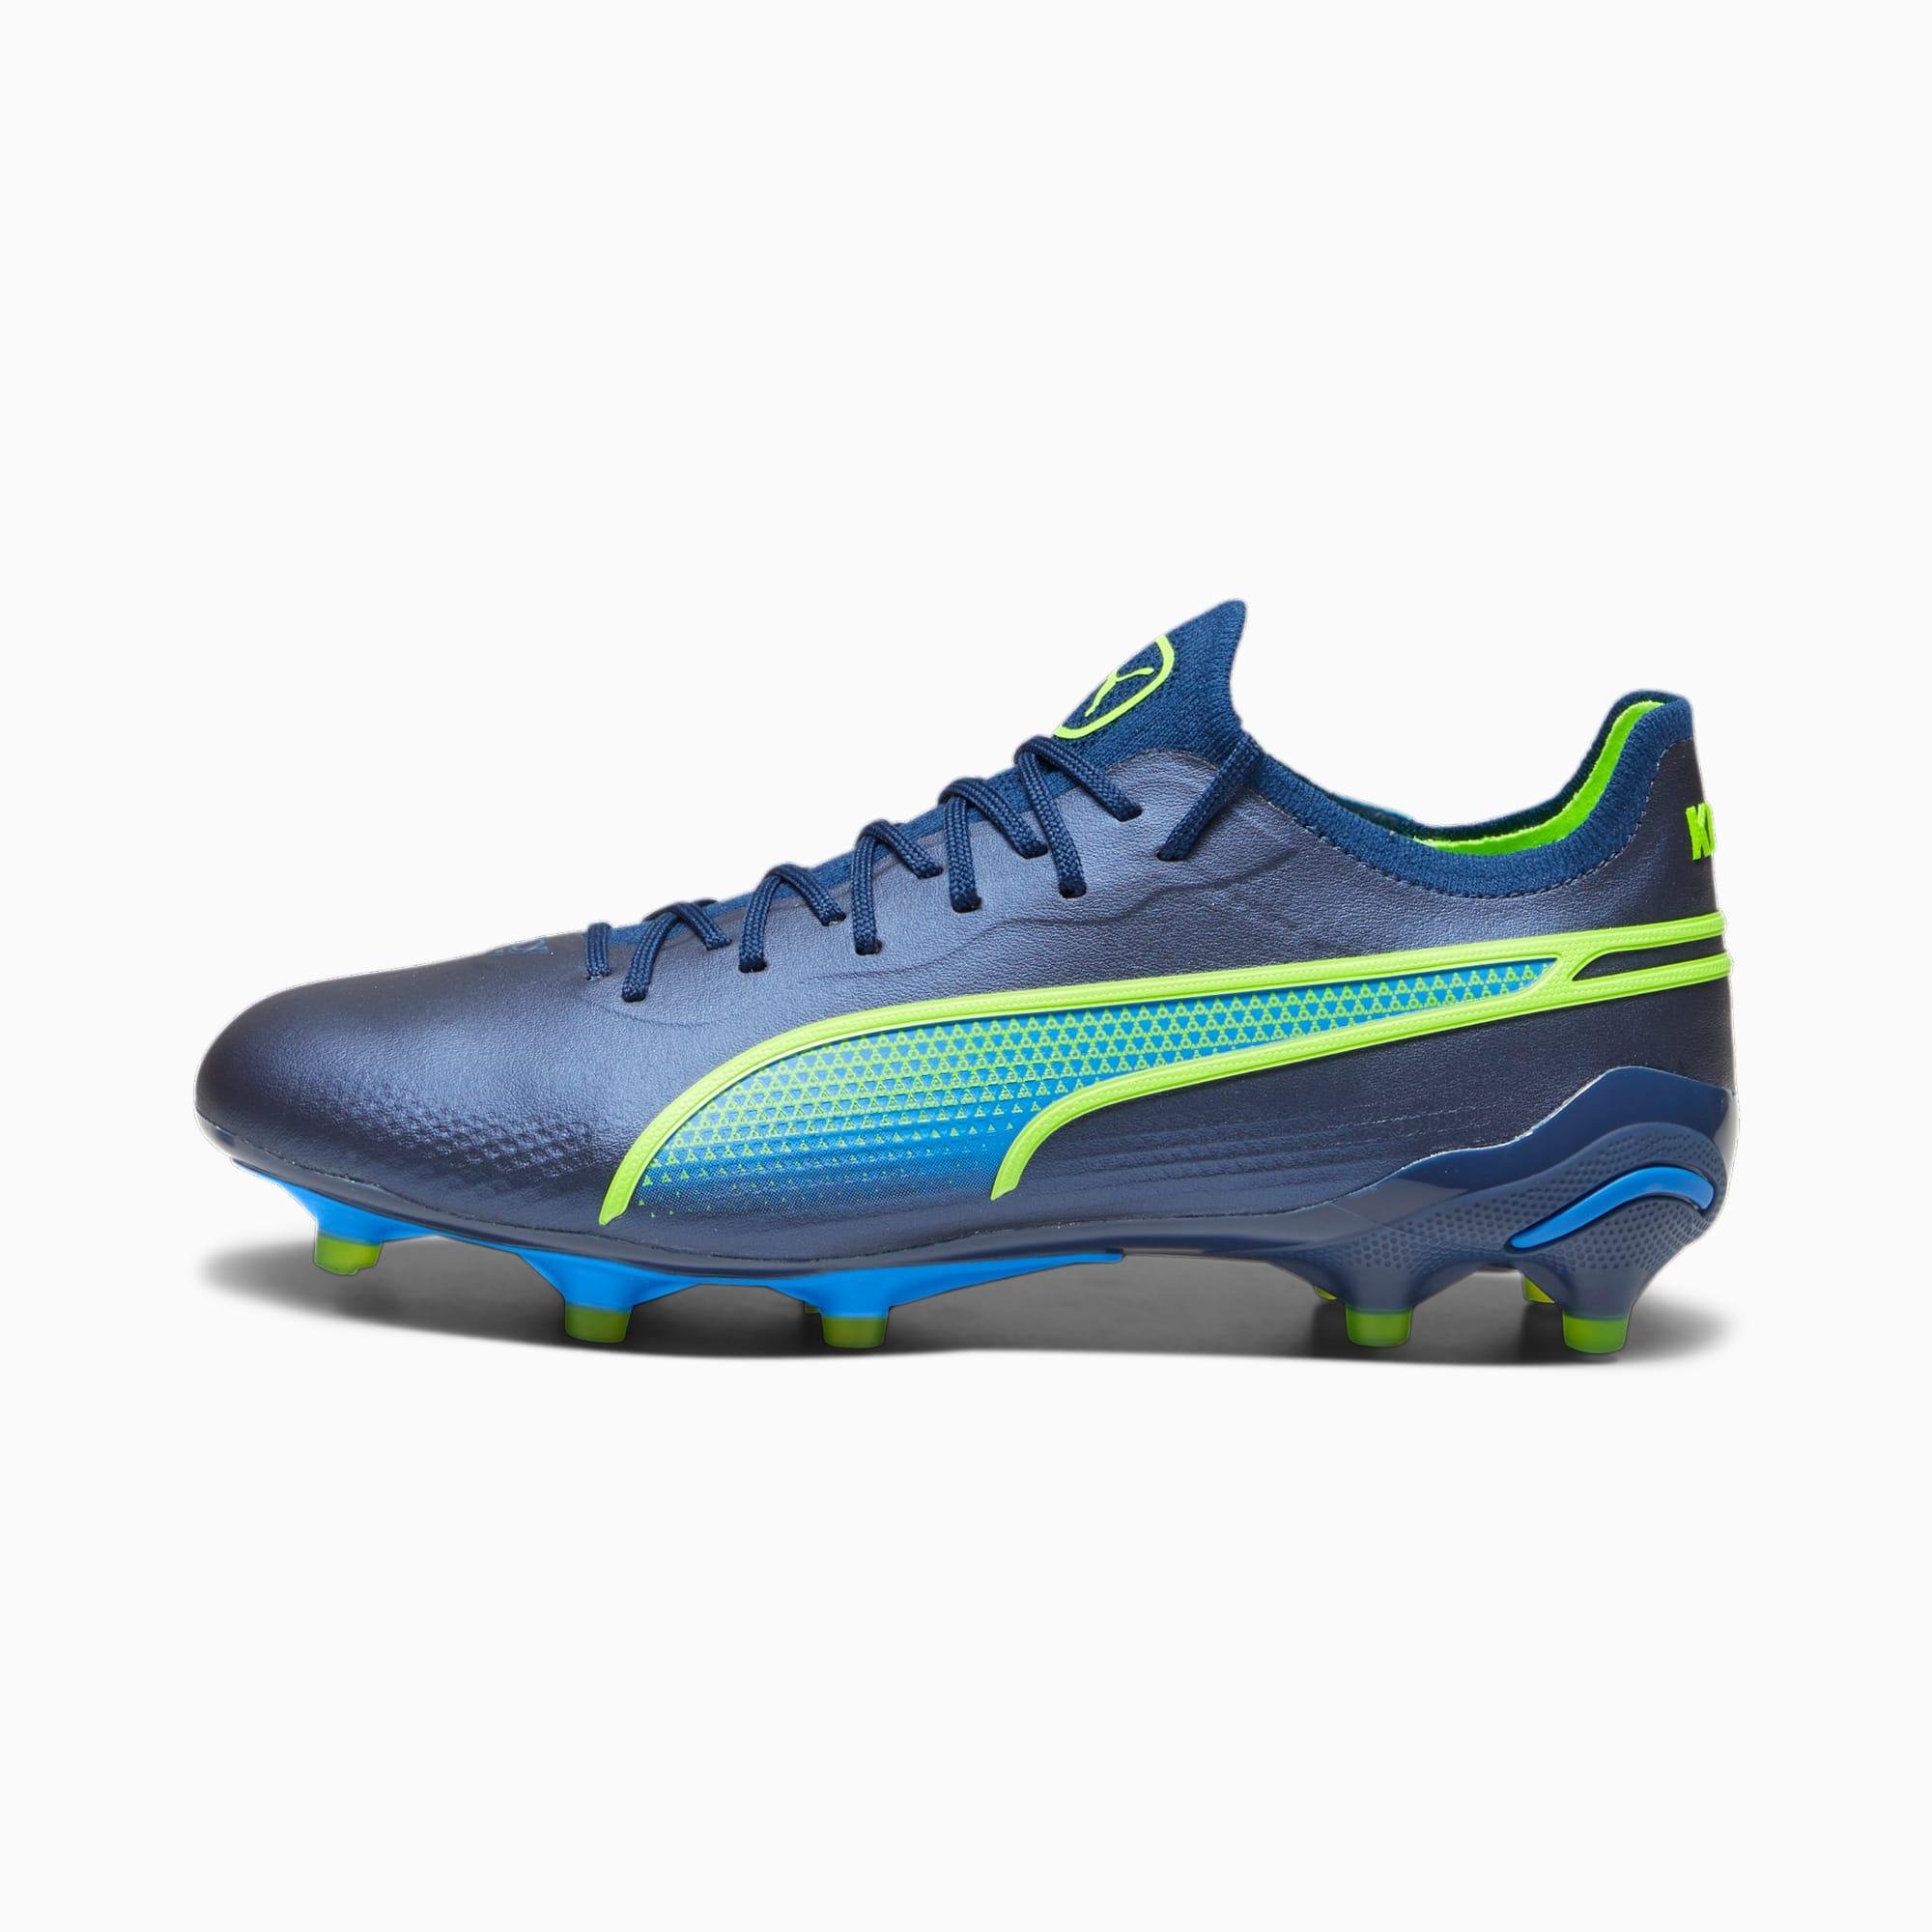 KING ULTIMATE FG/AG Women's Soccer Cleats by PUMA